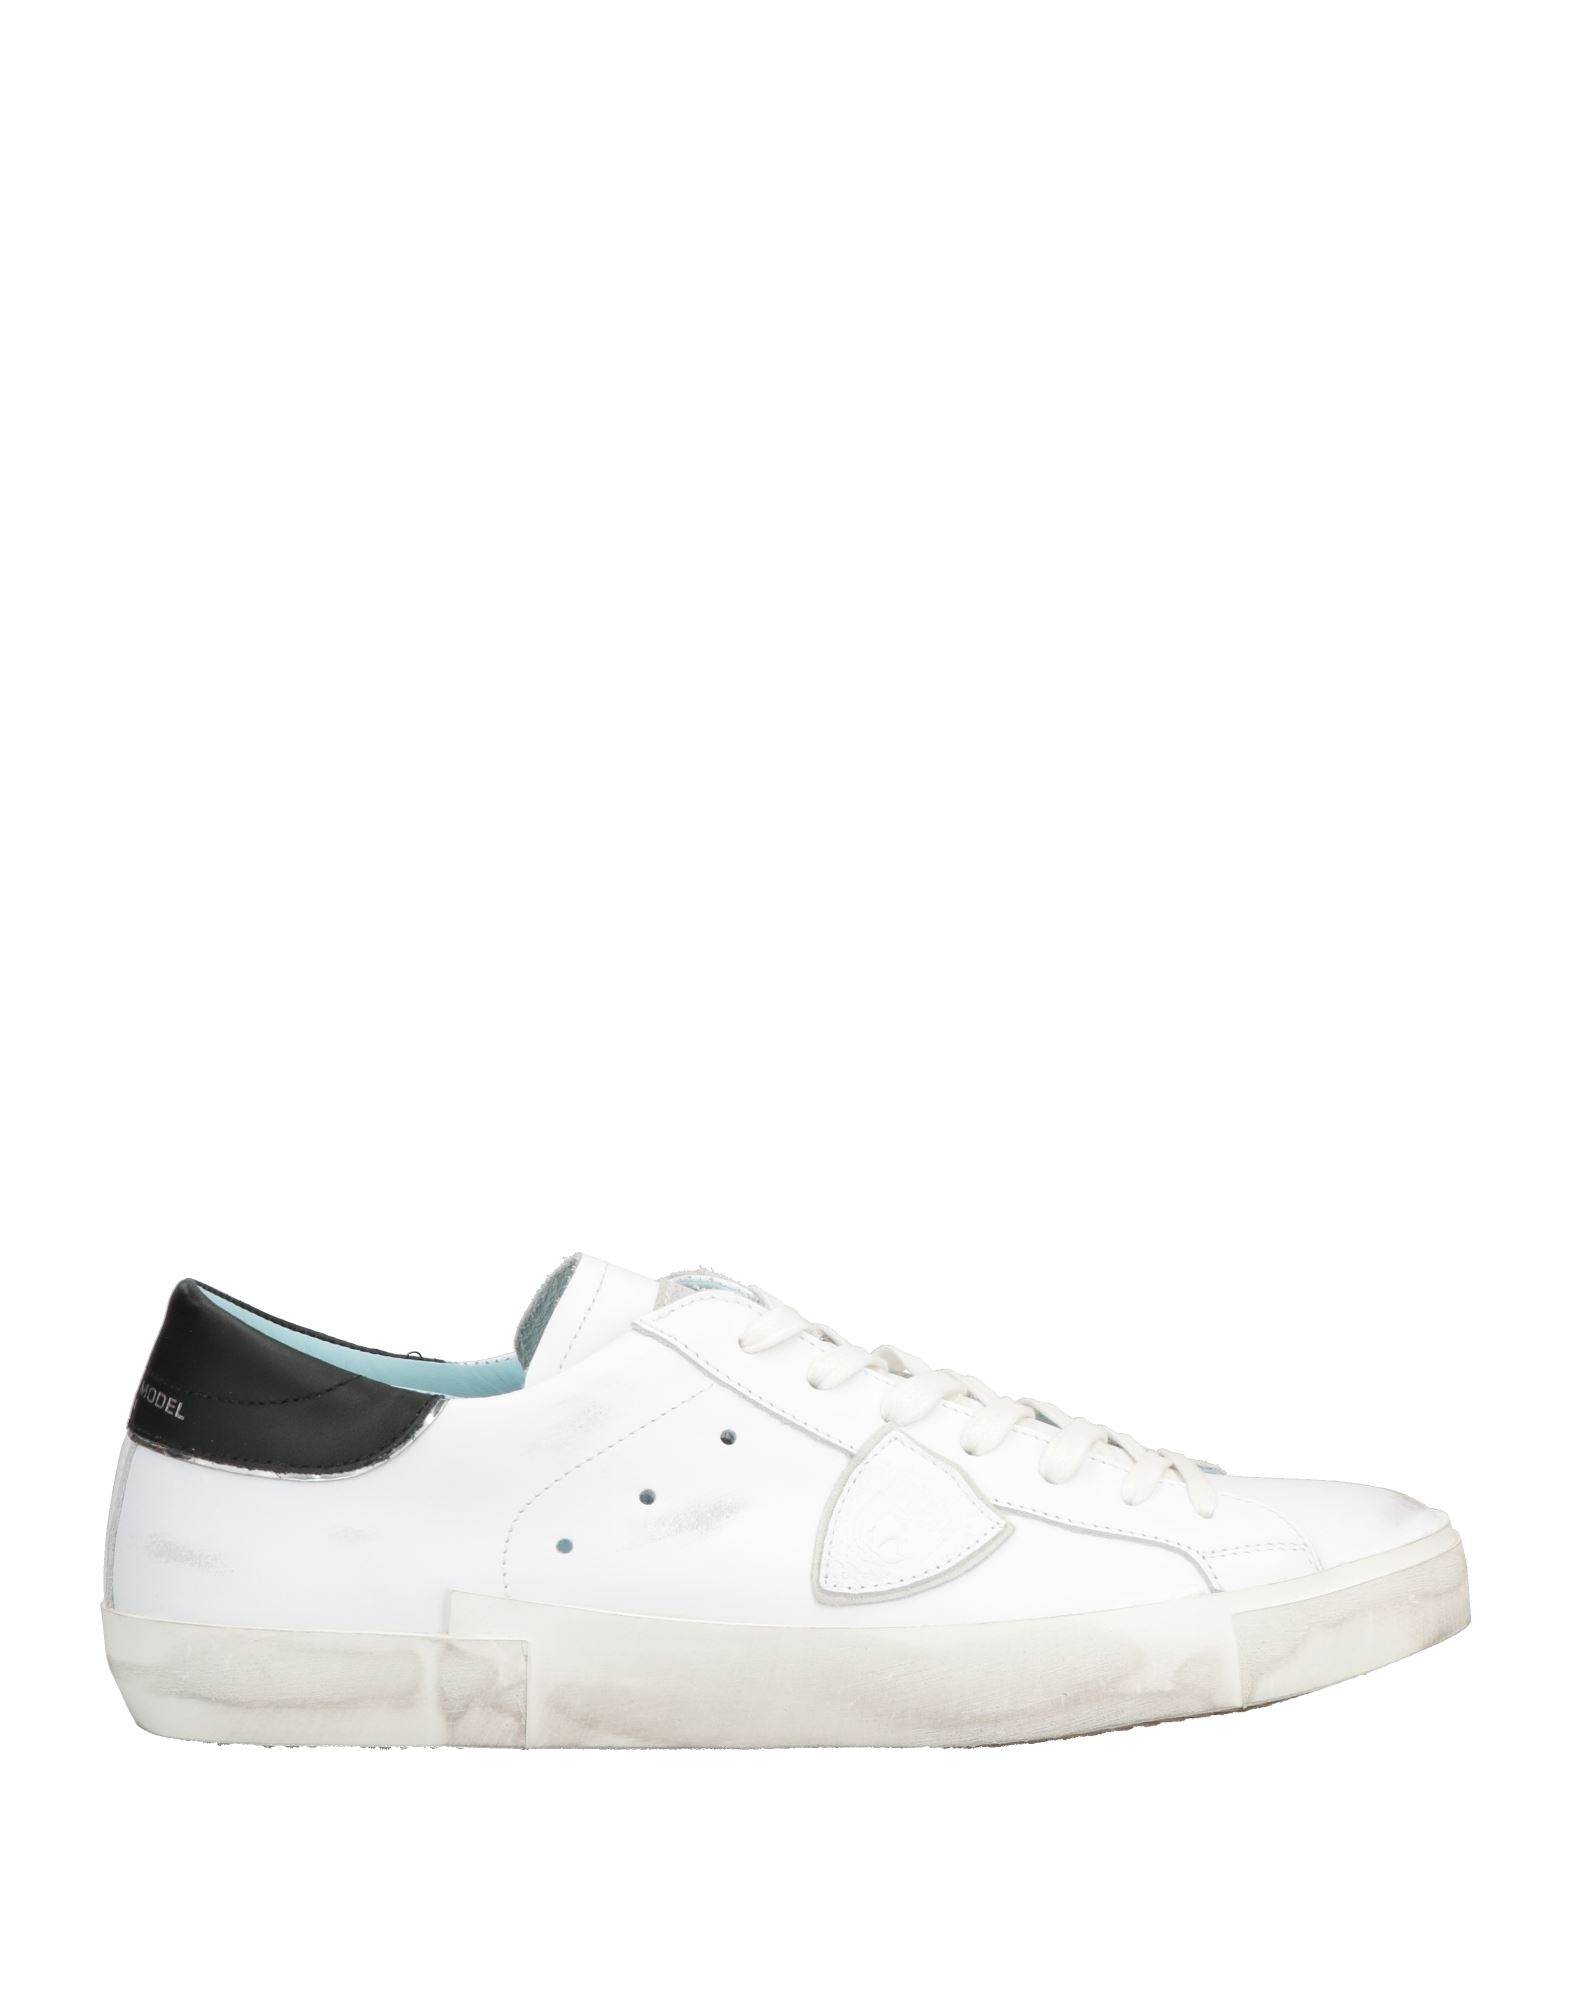 PHILIPPE MODEL PHILIPPE MODEL MAN SNEAKERS WHITE SIZE 8 SOFT LEATHER